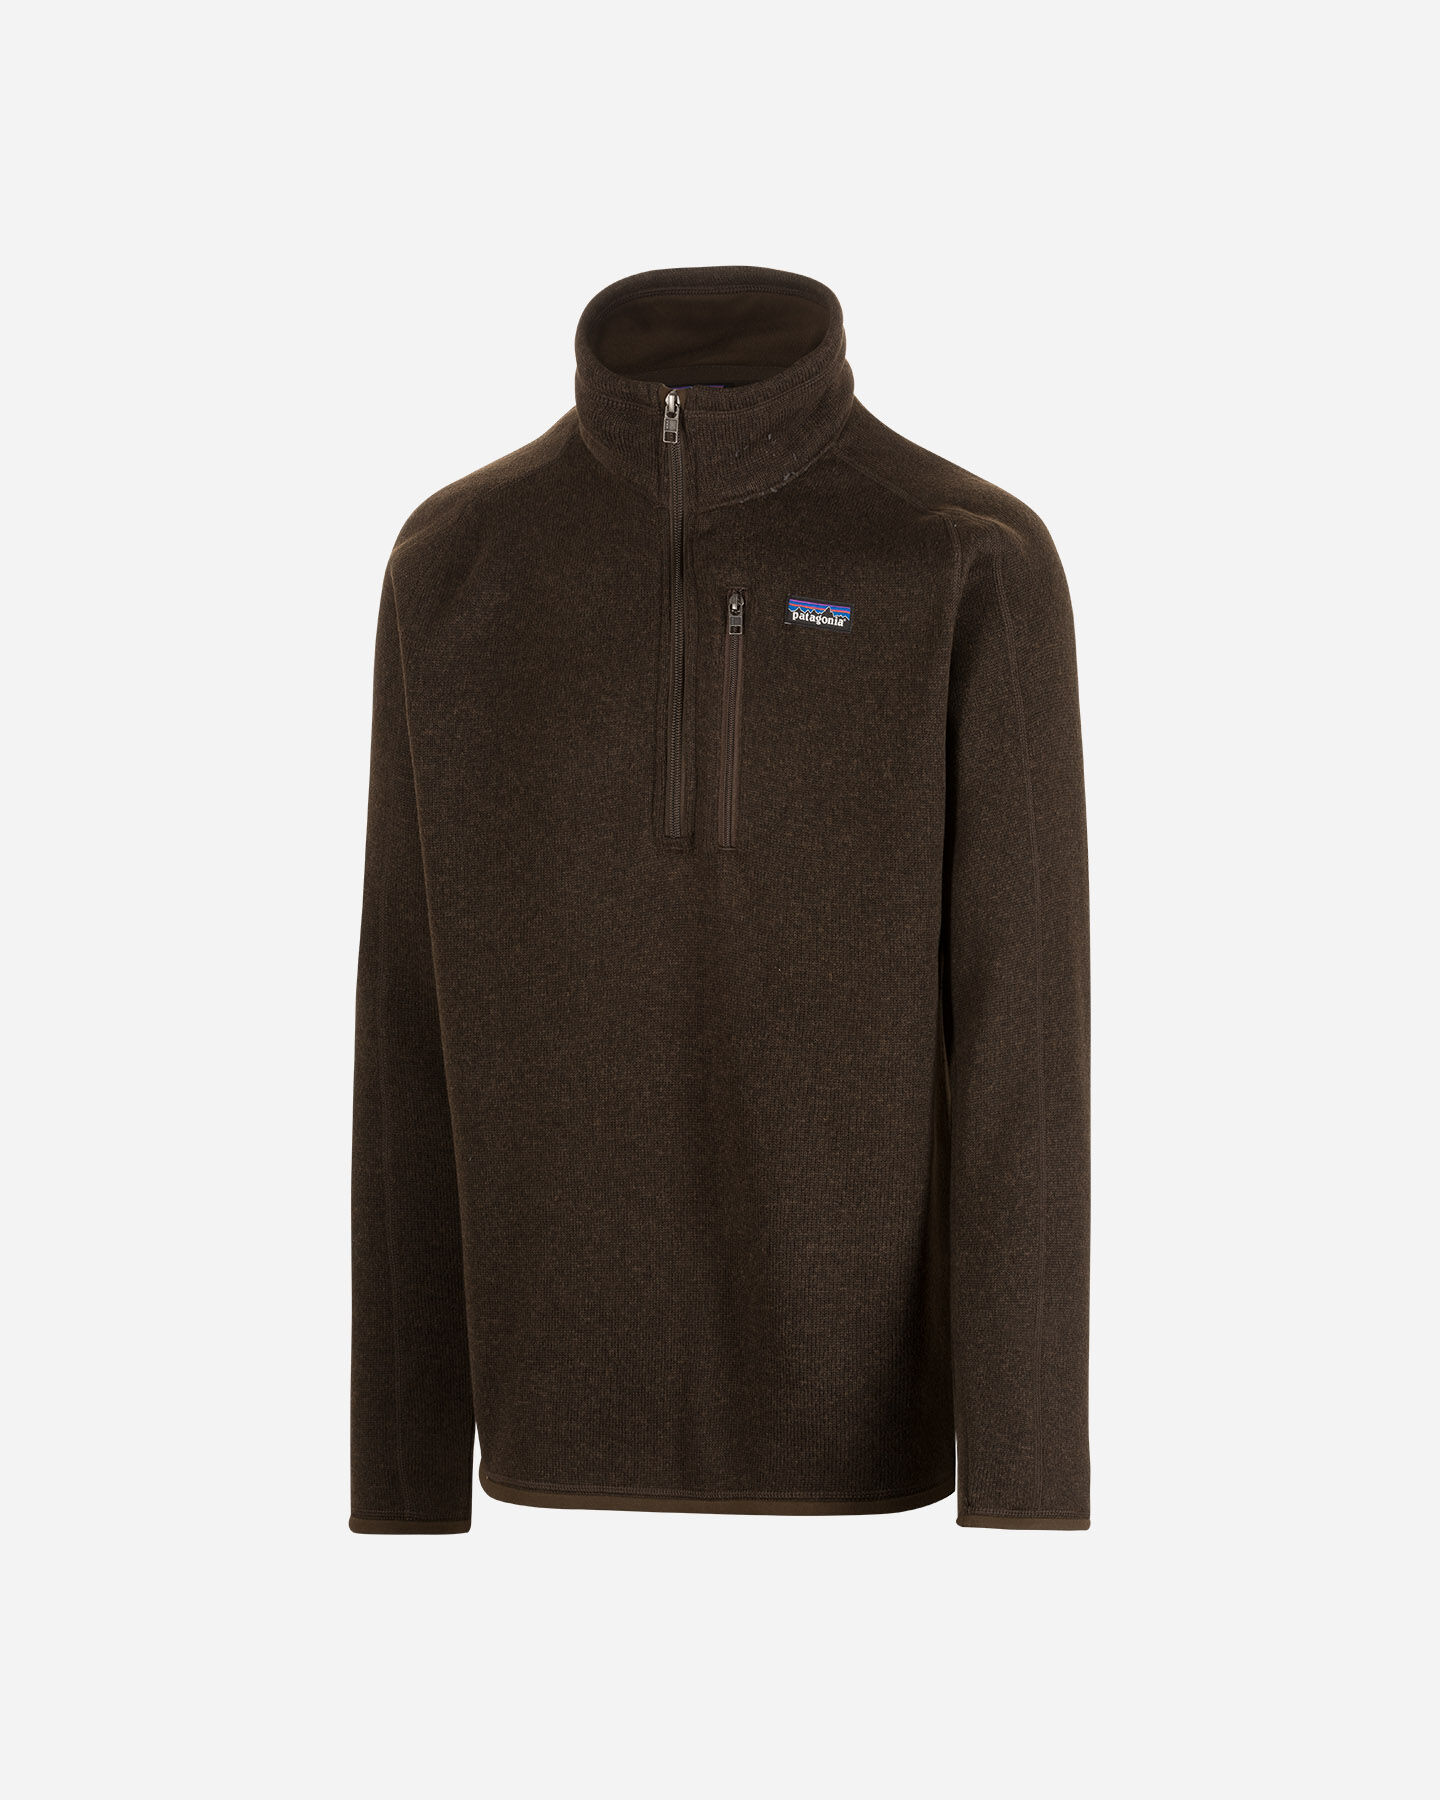  Pile PATAGONIA BETTER SWEATER M S4092865|LDBR|S scatto 0